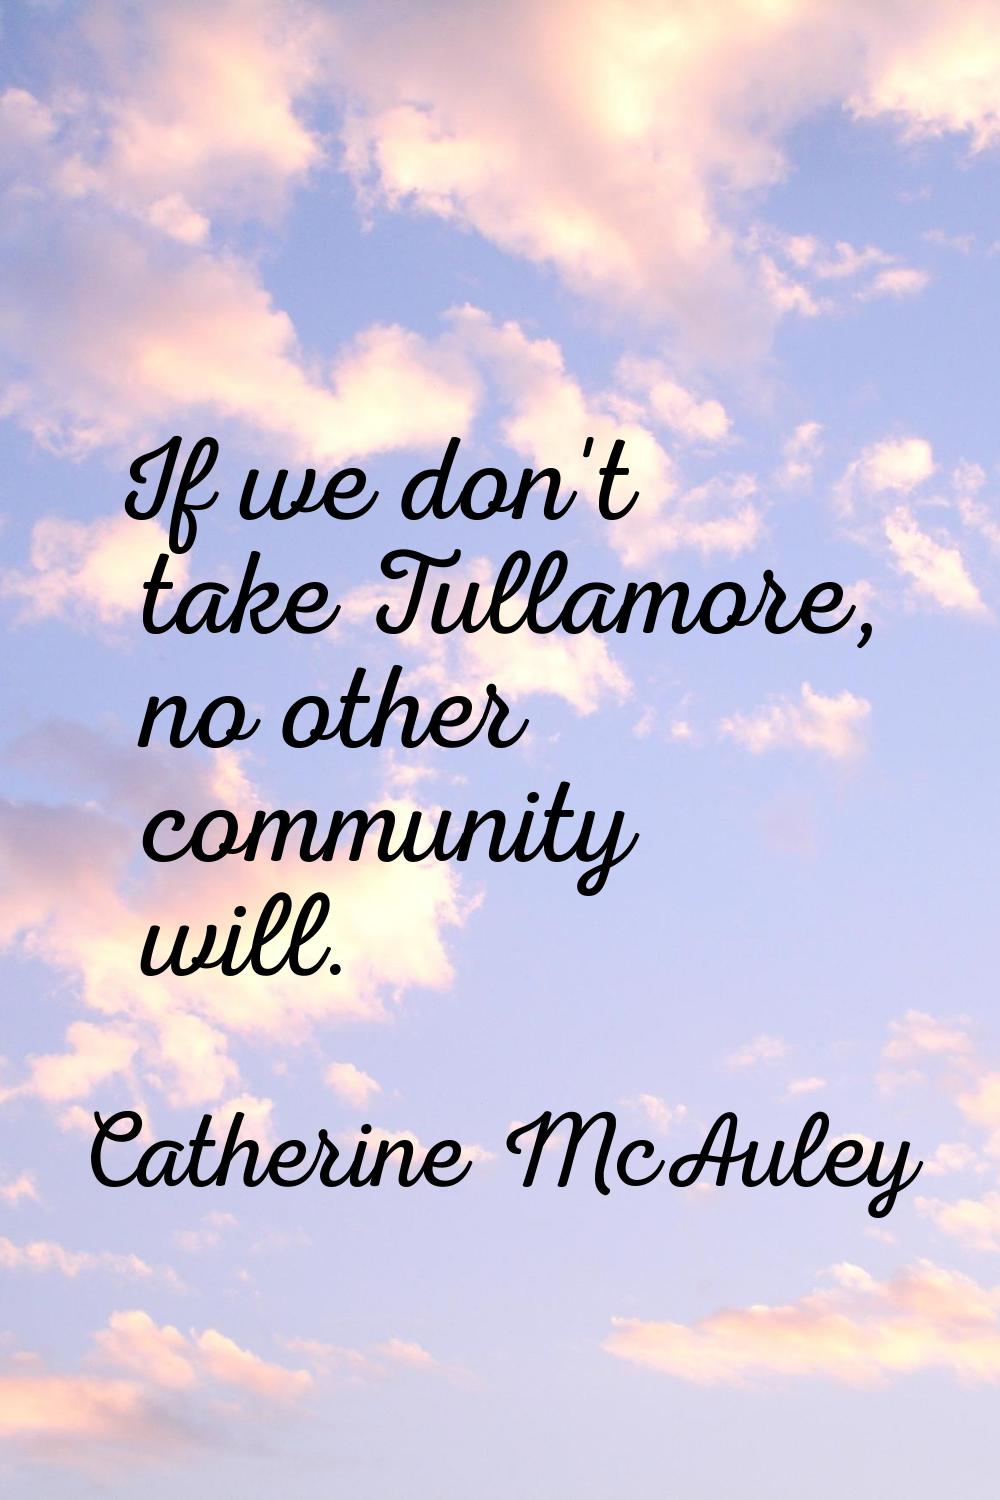 If we don't take Tullamore, no other community will.